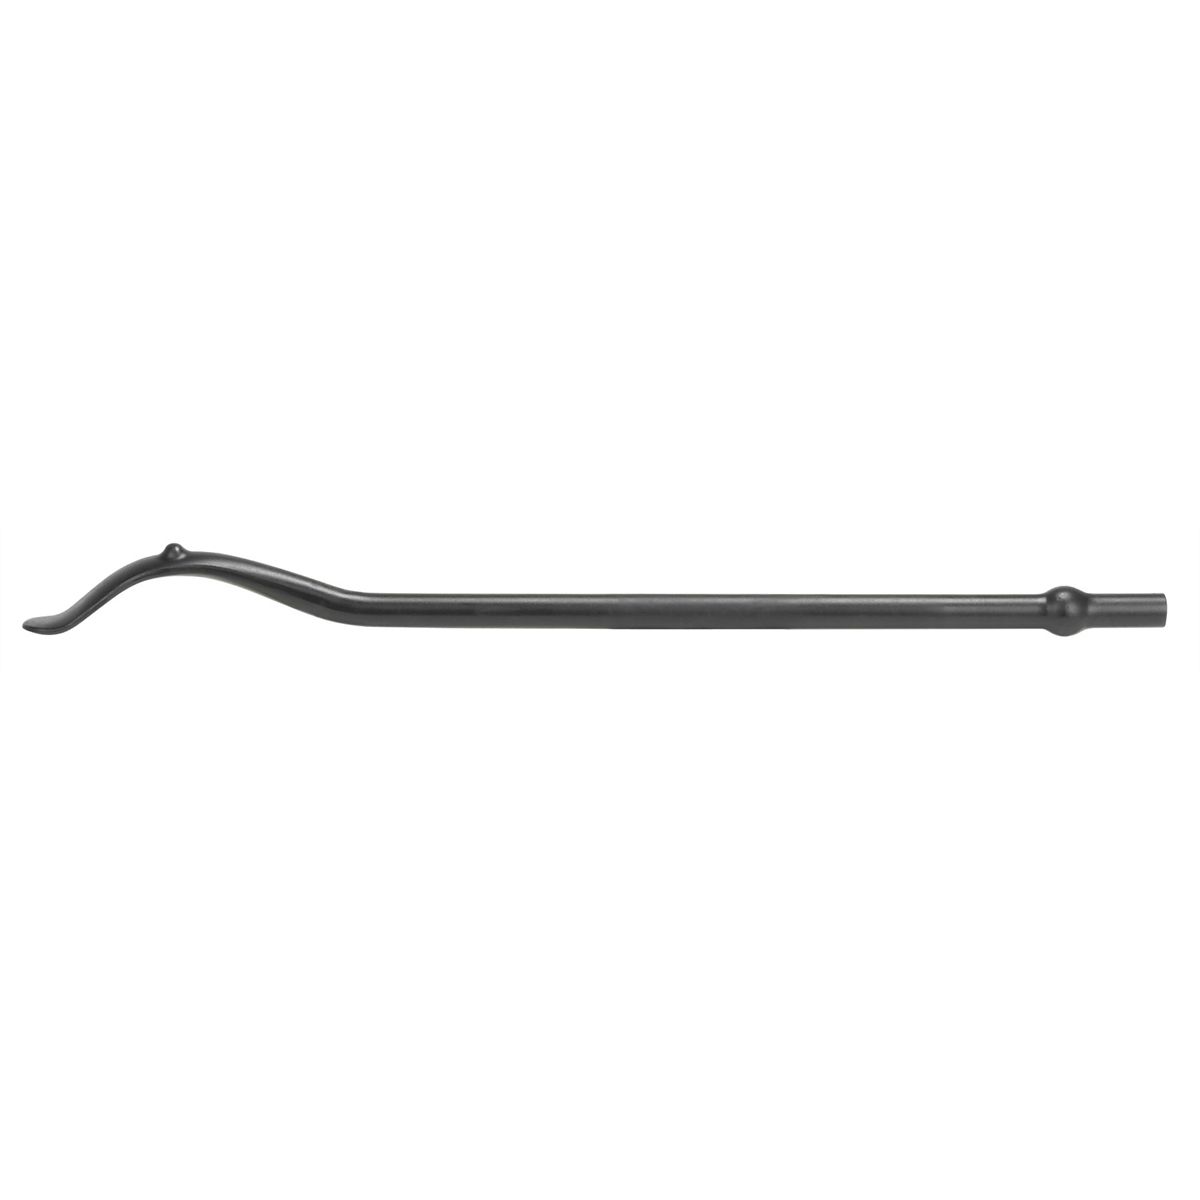 24" Curved Shank Tire Spoon